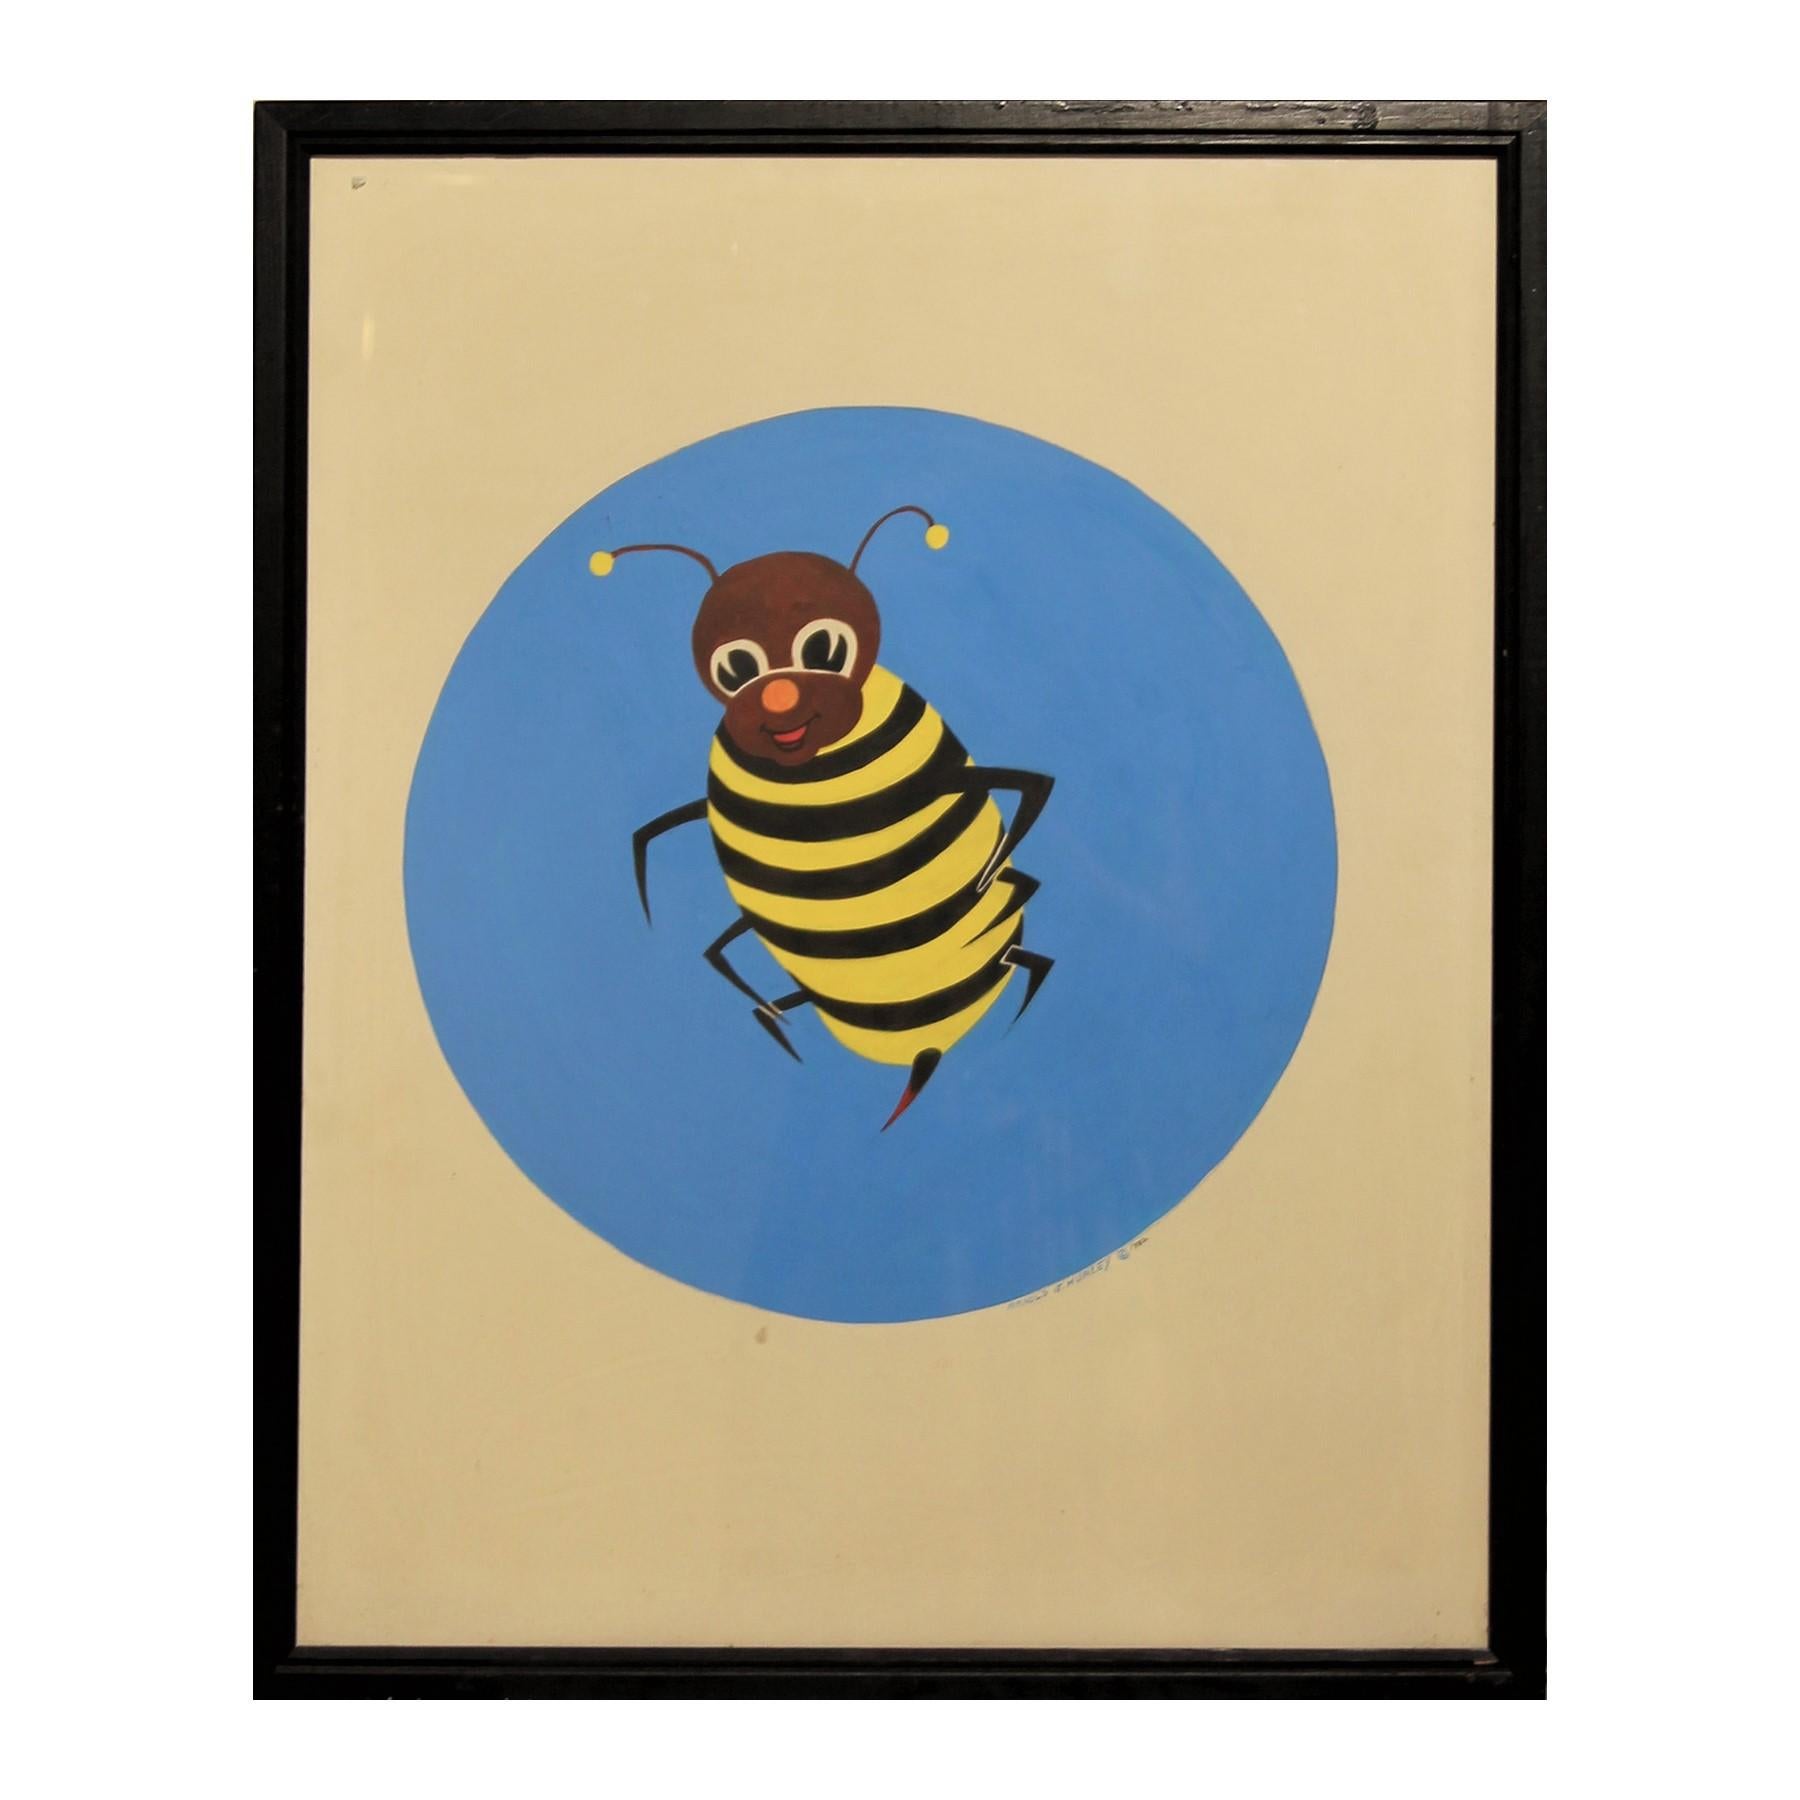 Arnold J. Hurley Animal Painting - Colorful Blue, Yellow, and Black Bumble Bee Pop Art Insect Painting